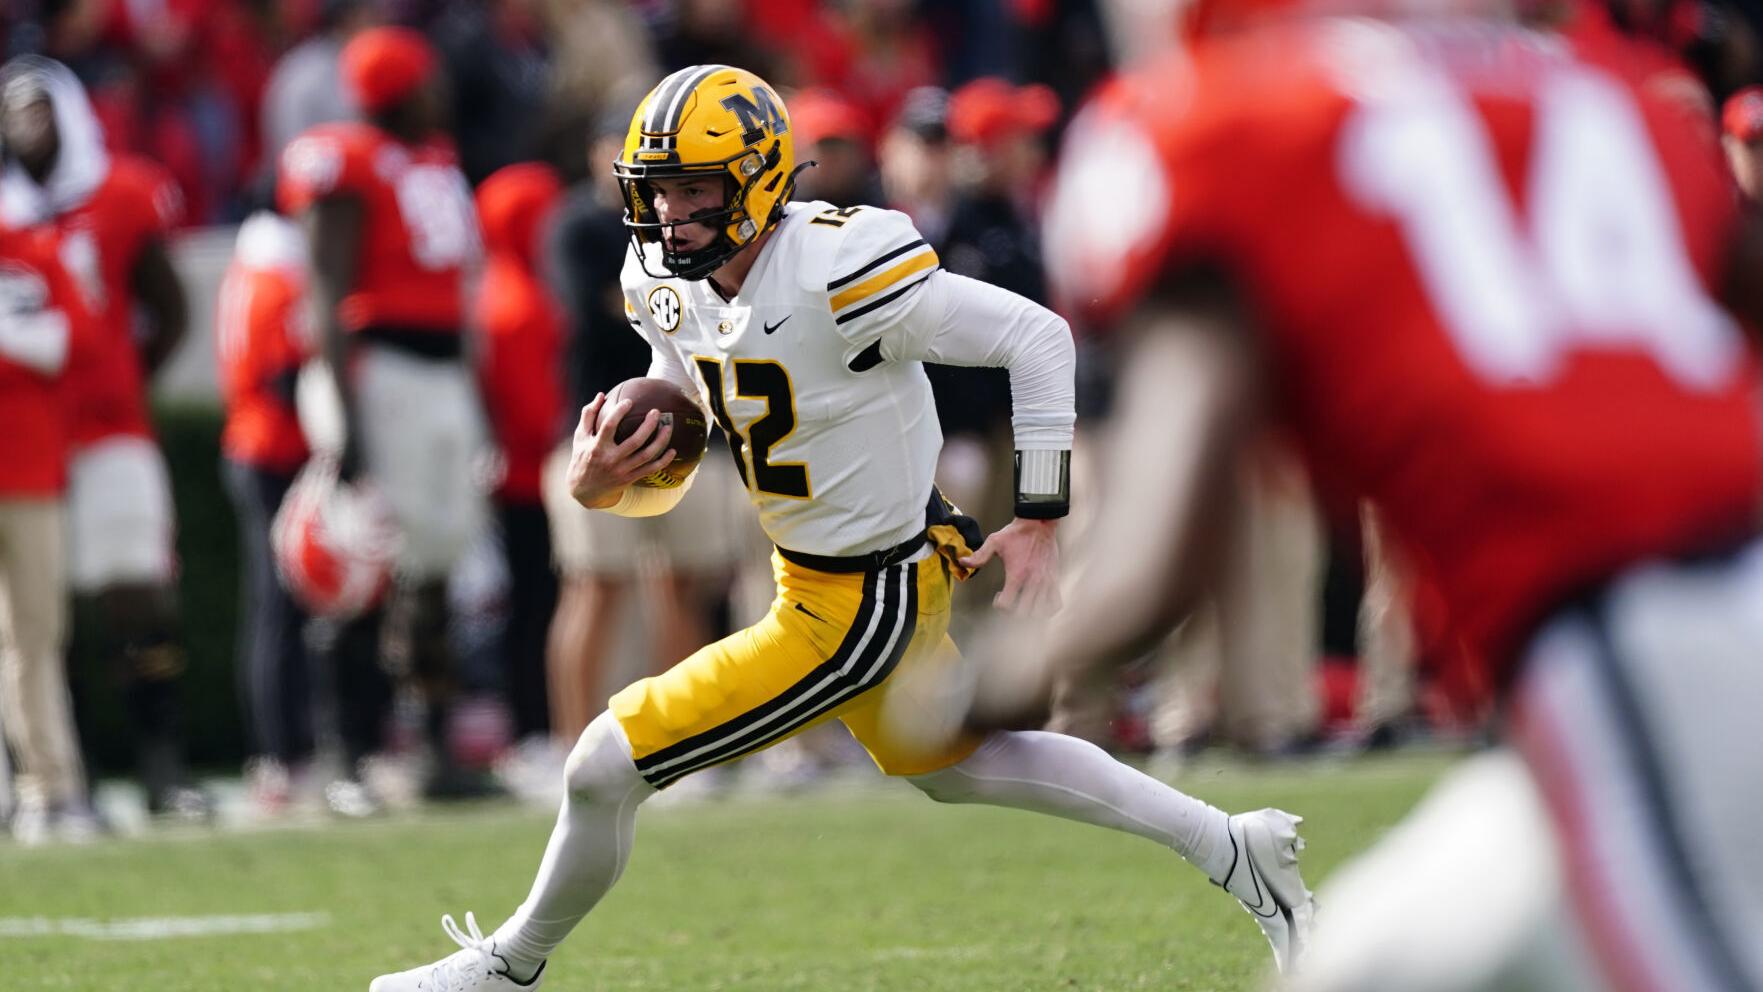 Brady Cooku2019s quest to lead Mizzou football to success started long ago